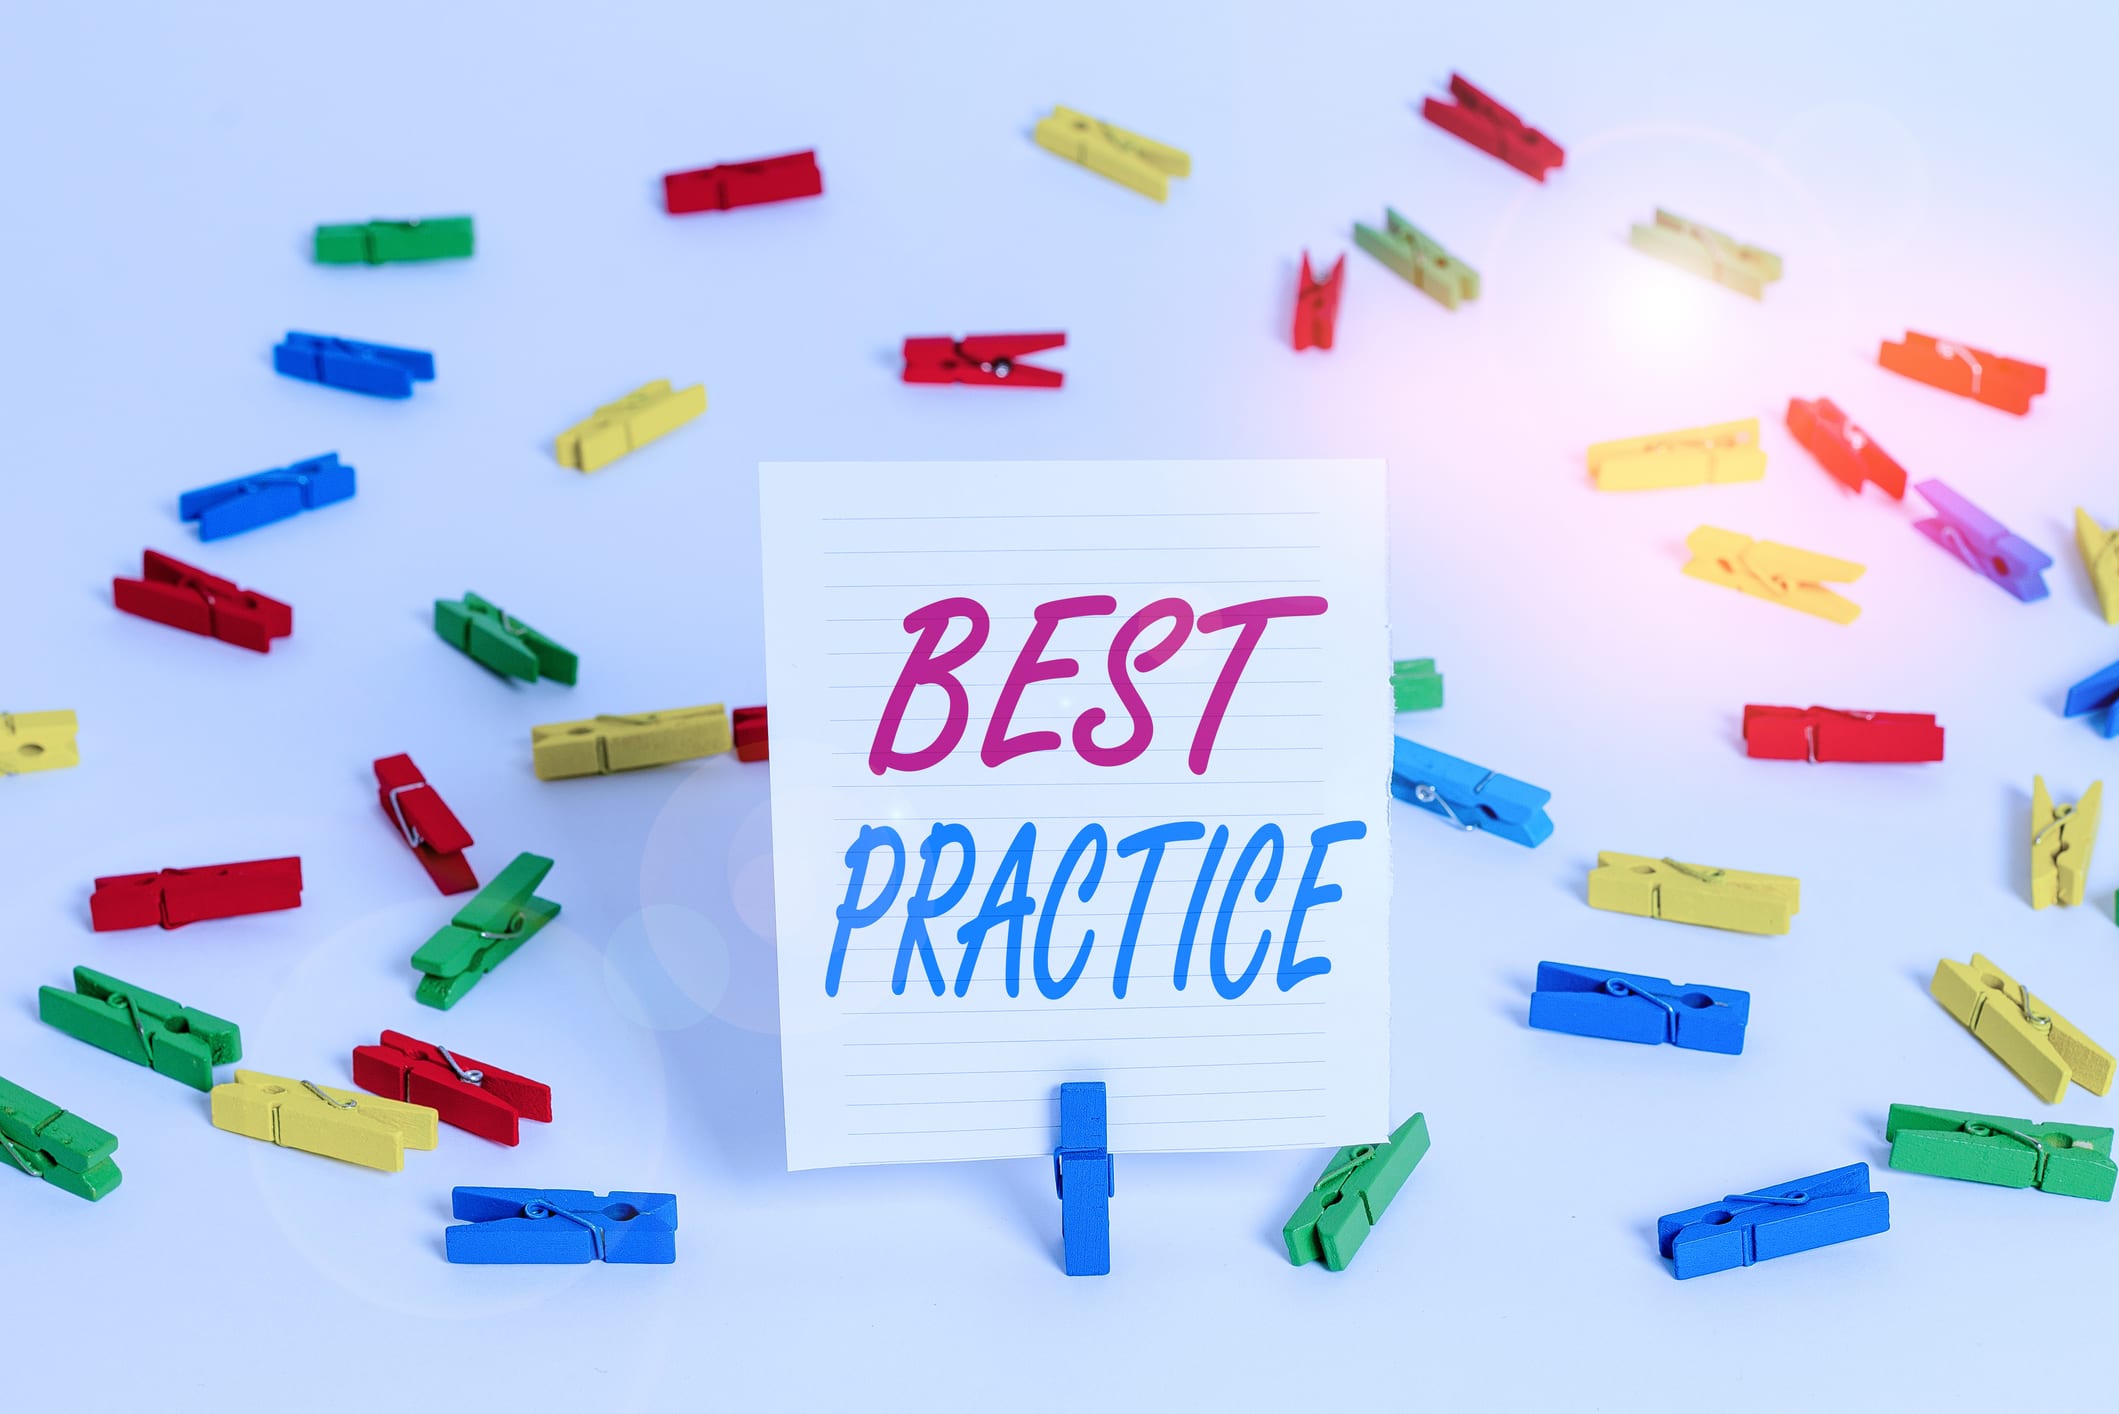 Pharmacy Business Best Practices in the Digital Age